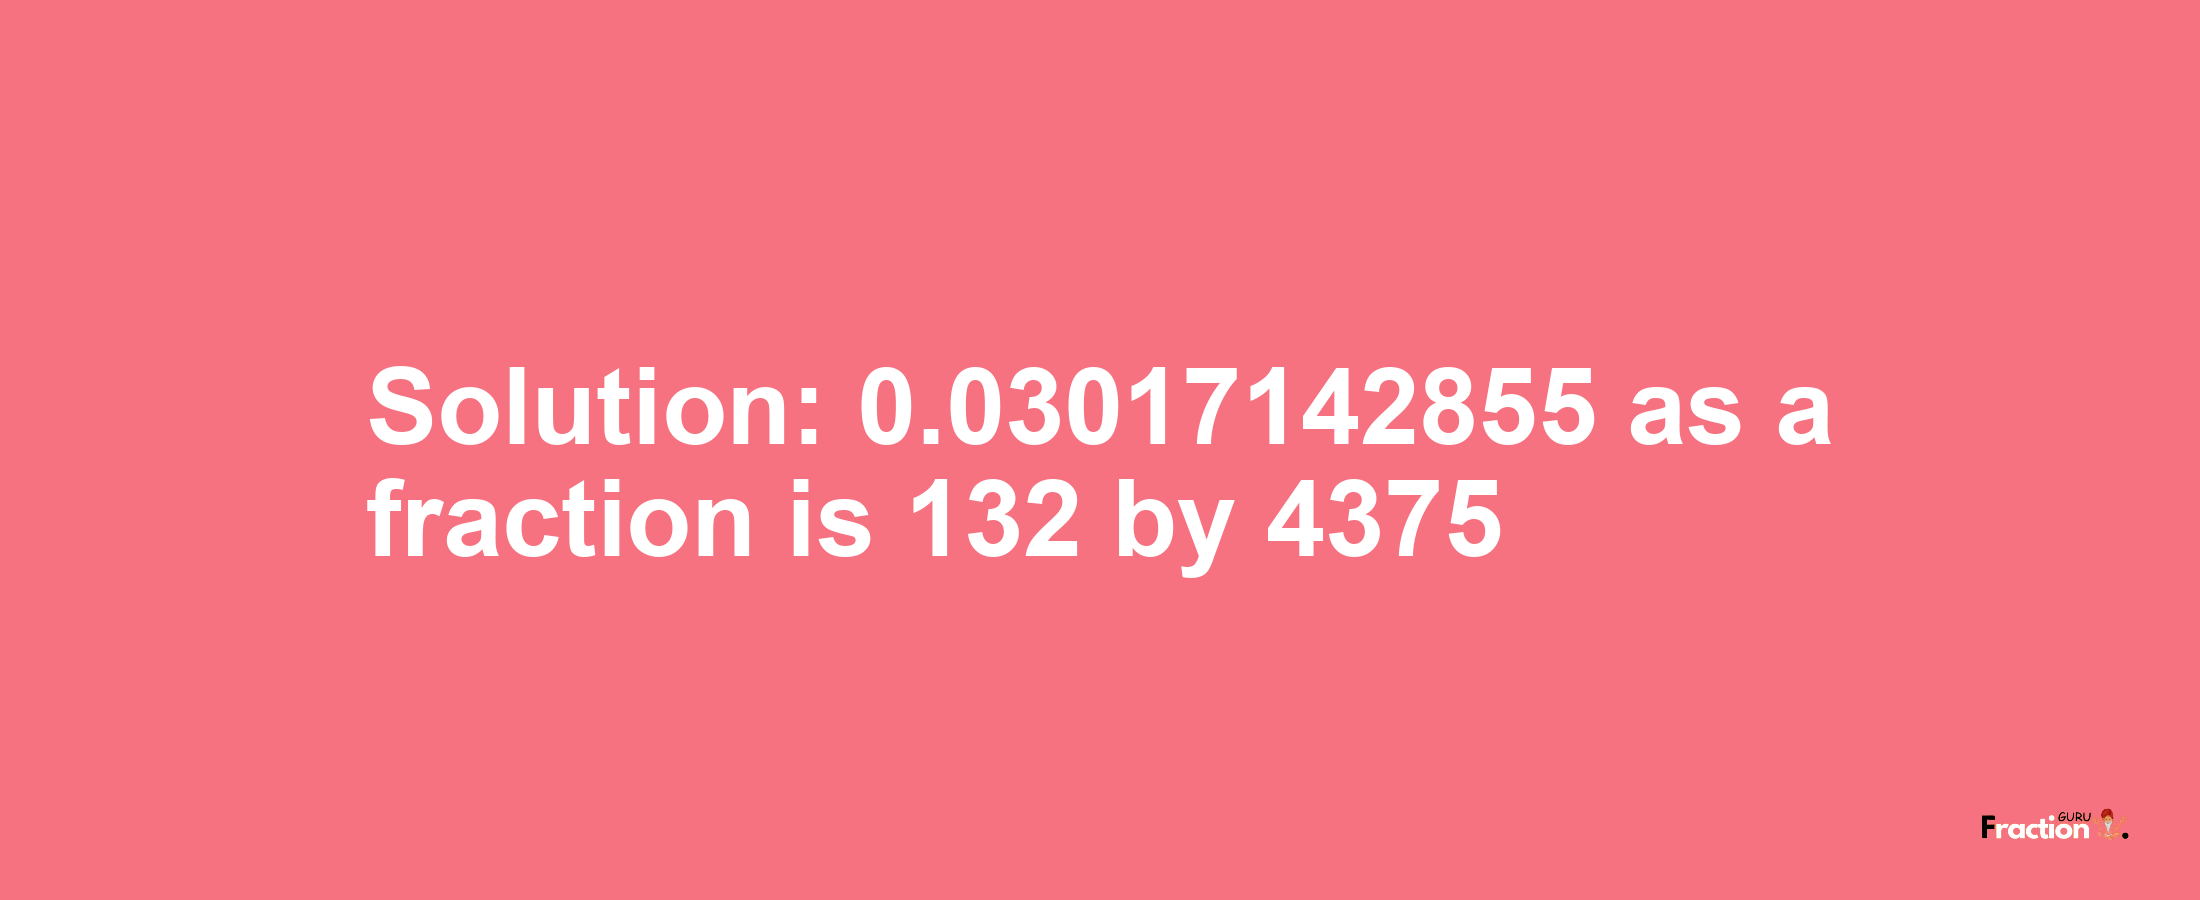 Solution:0.03017142855 as a fraction is 132/4375